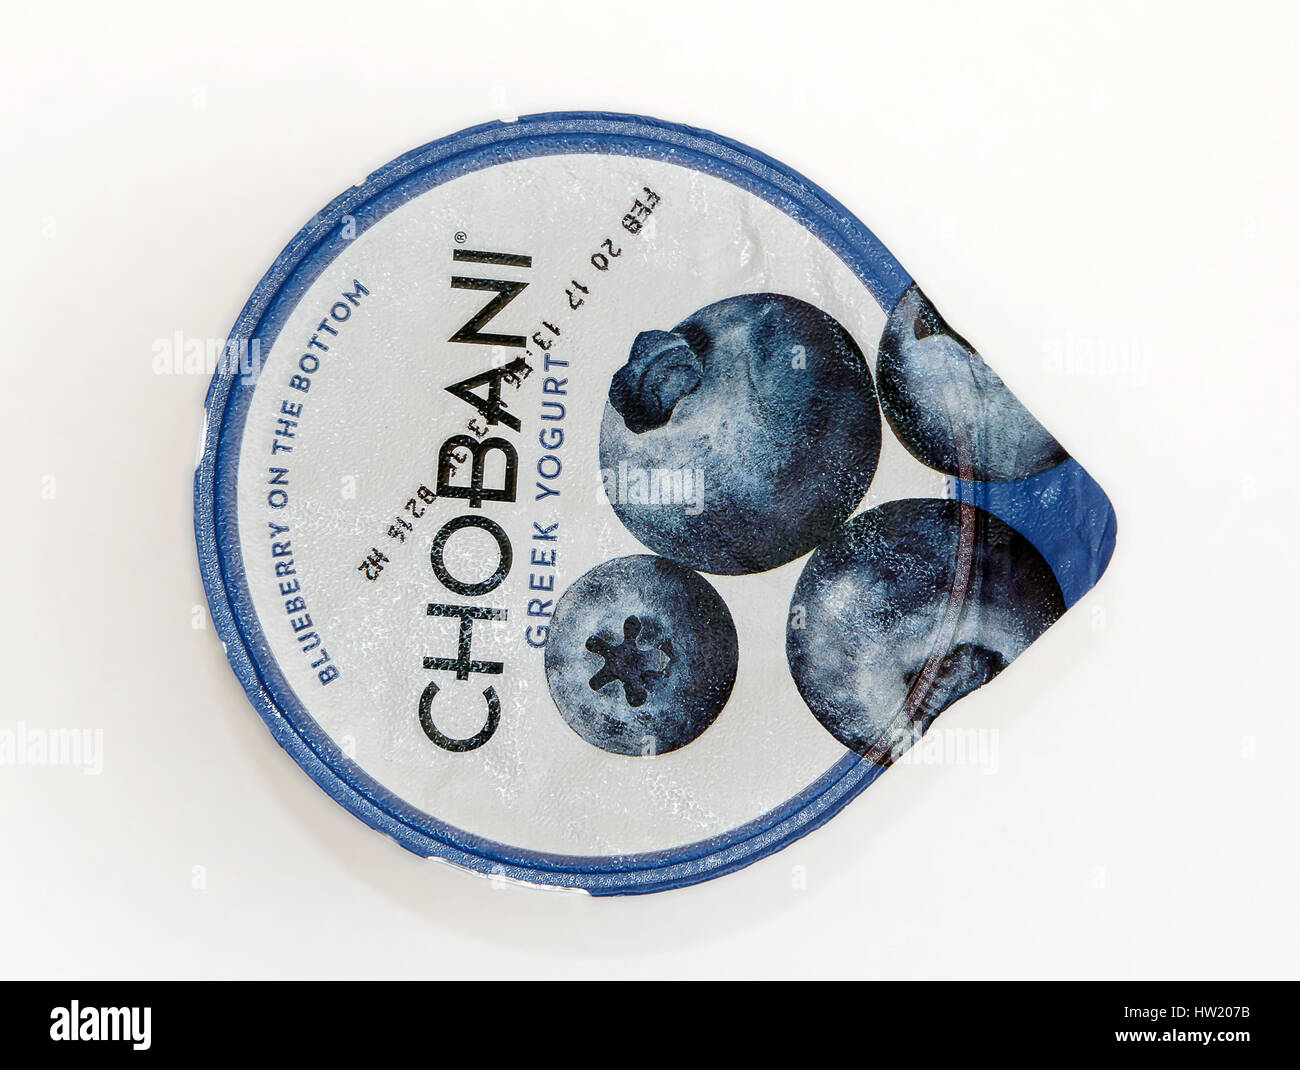 Top view of a container of blueberry Chobani Greek yogurt against white background. Stock Photo